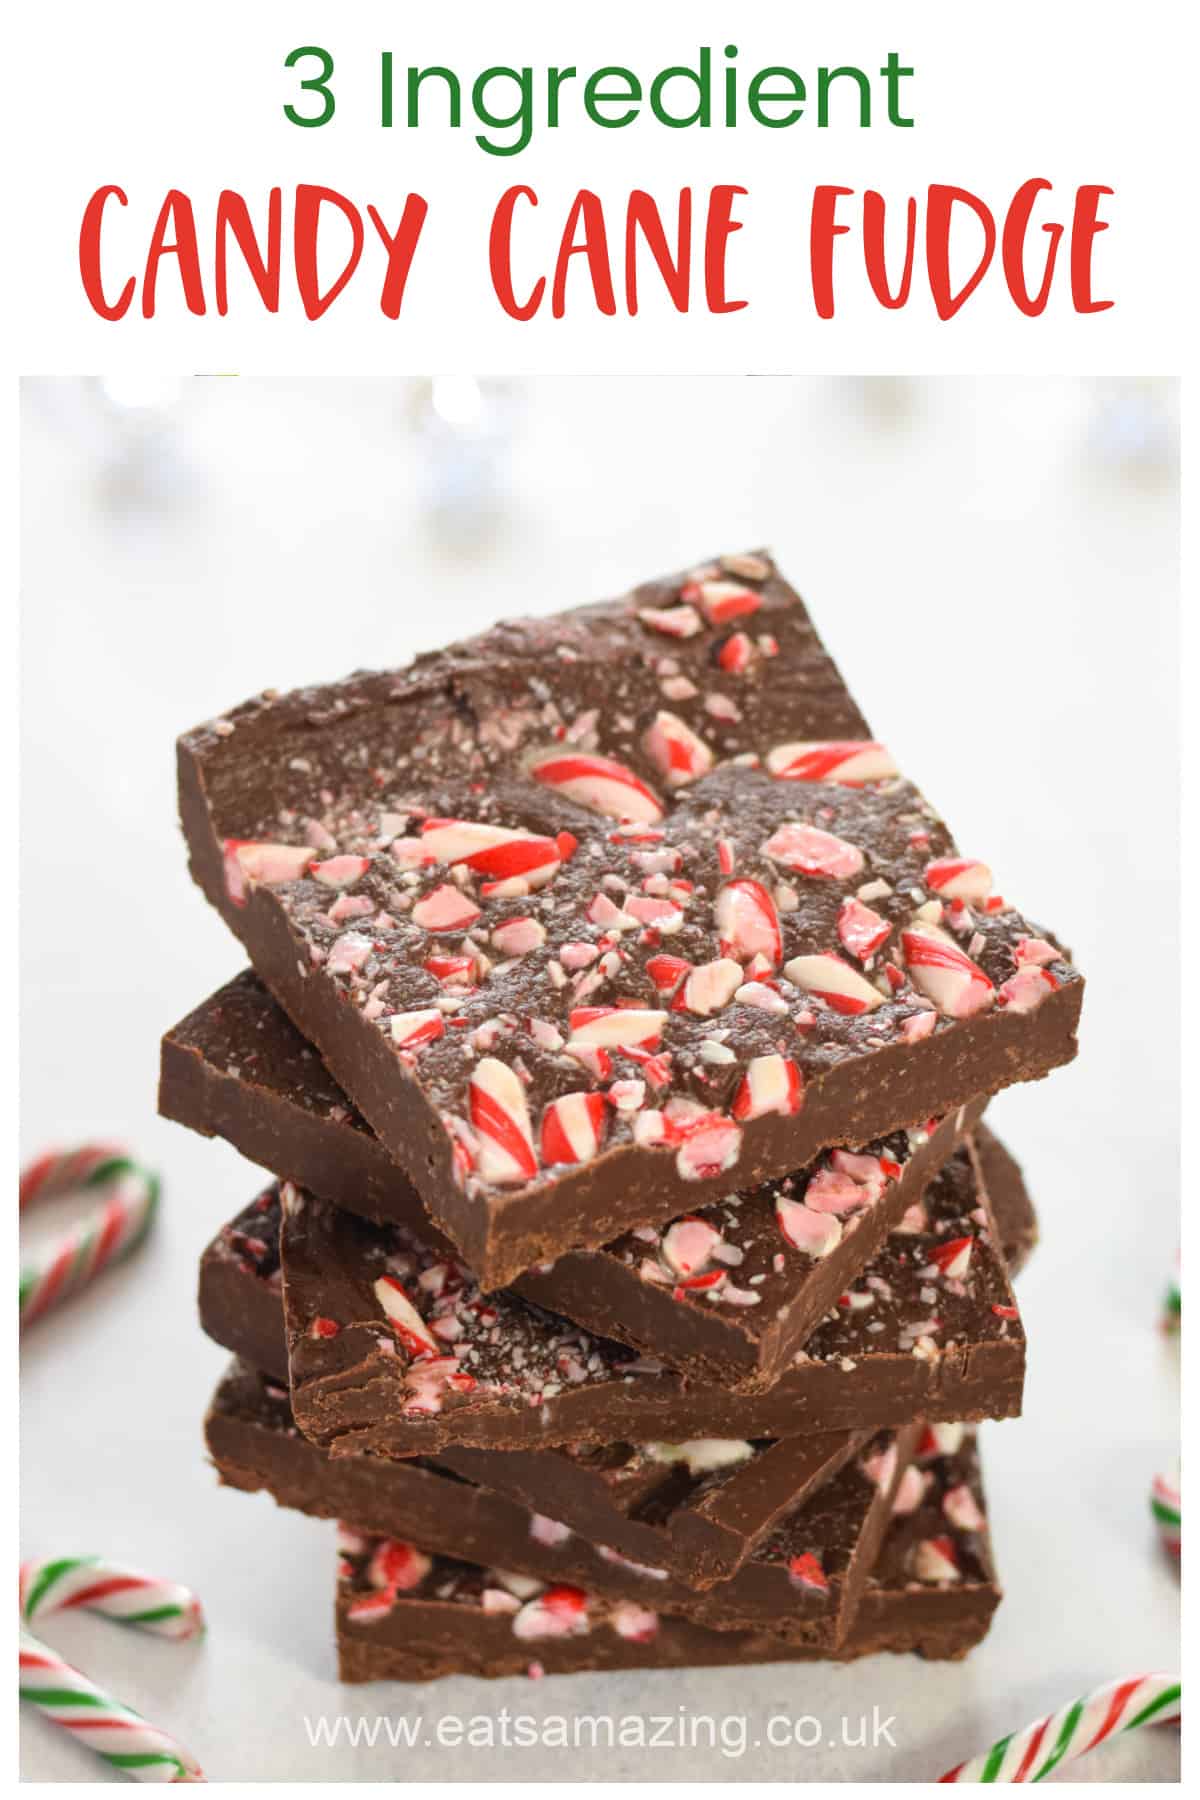 Quick and easy candy cane fudge - 3 ingredients for this easy chocolate fudge - perfect for homemade Christmas gifts